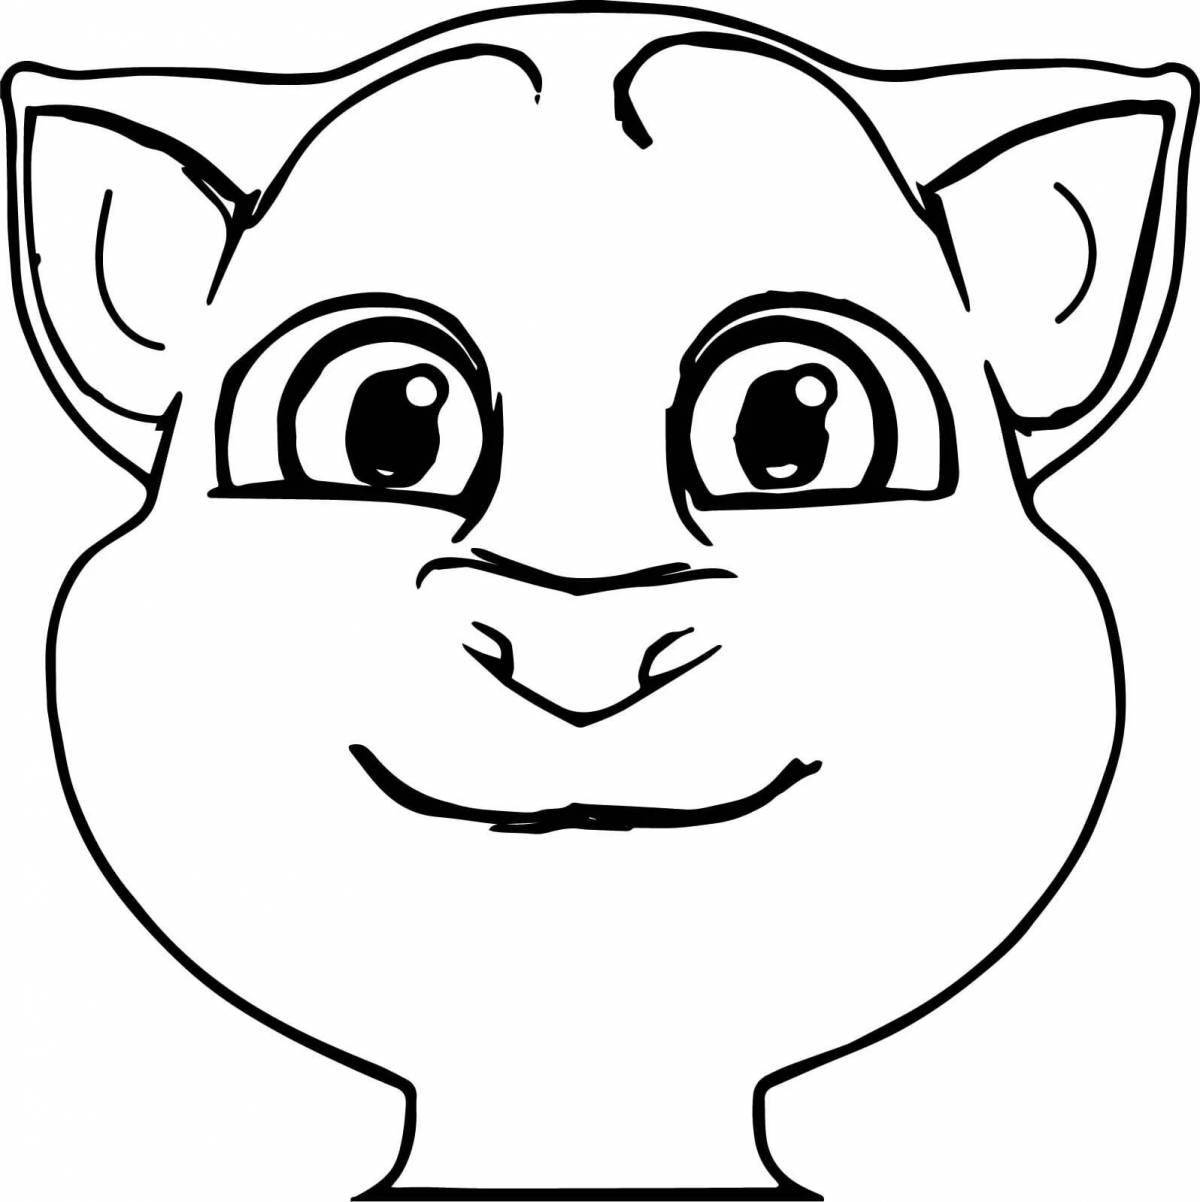 Outstanding coloring page my talking angela